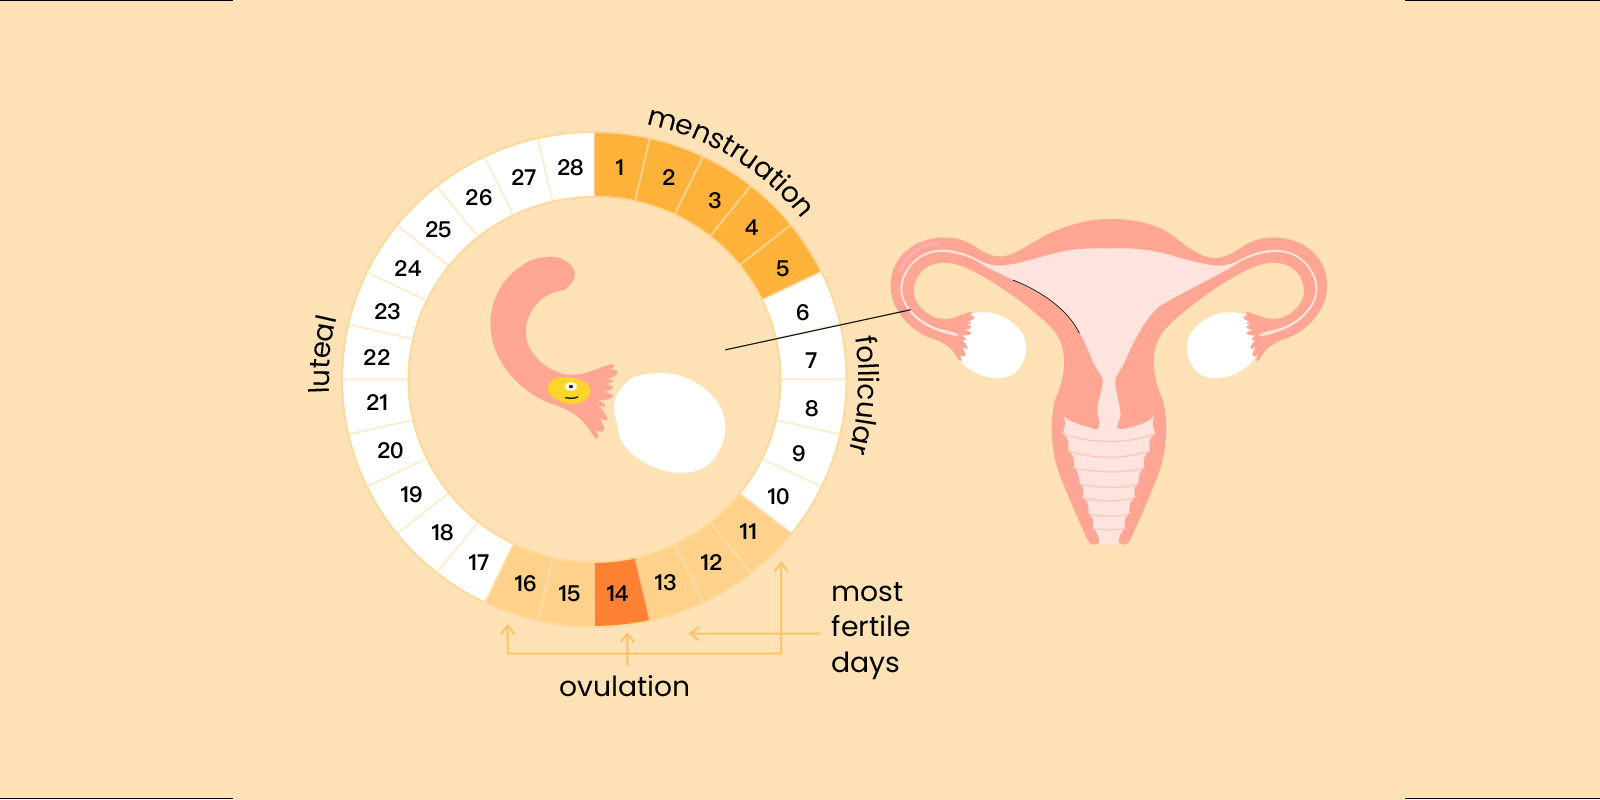 cartton of women's menstrual cycle 4 phases